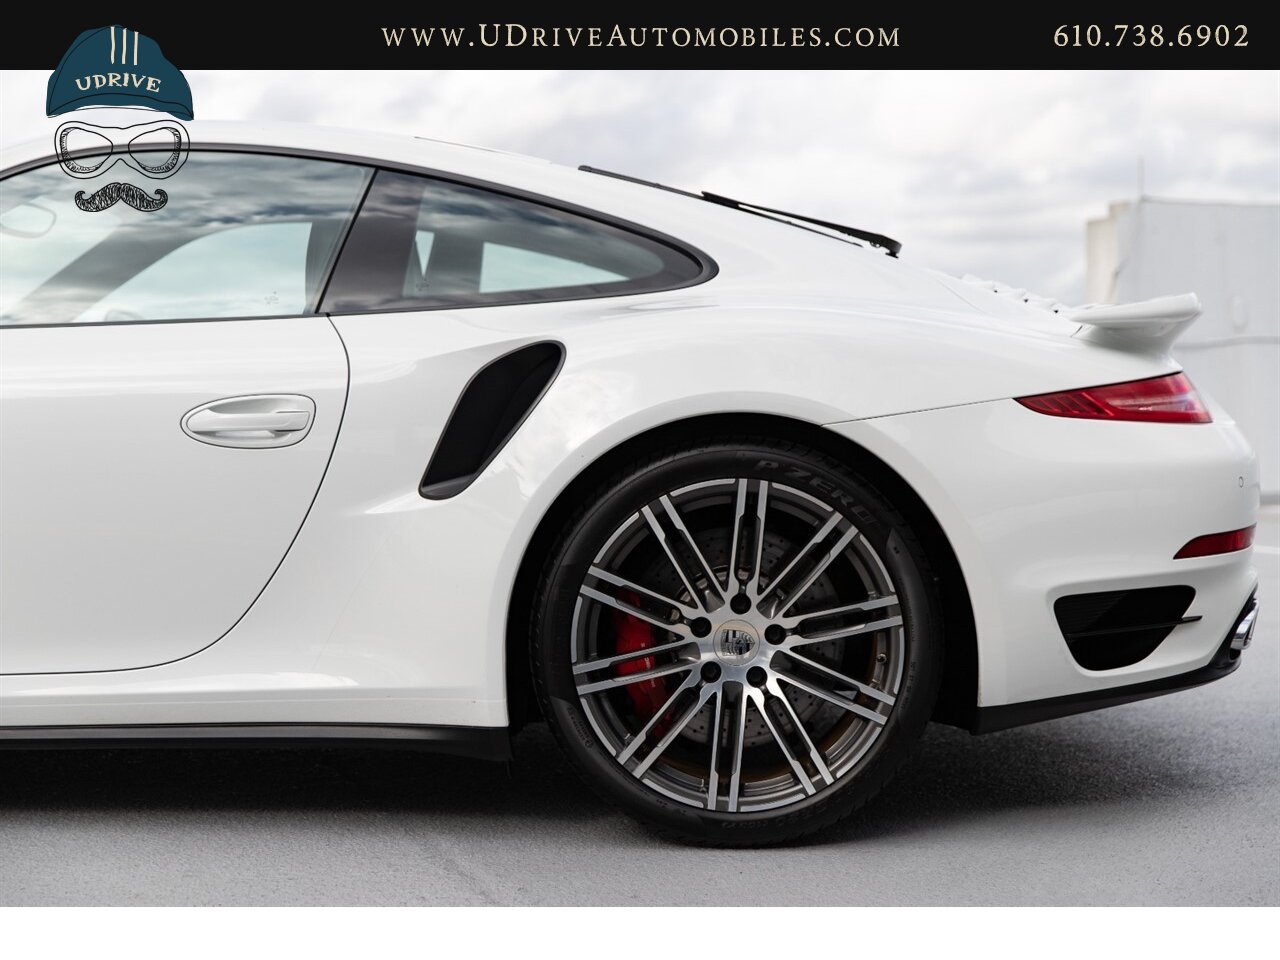 2014 Porsche 911 Turbo 12k Miles White over Black Chrono Rear Wiper  Sport Seats 20in Turbo Whls Sunroof Red Belts - Photo 22 - West Chester, PA 19382